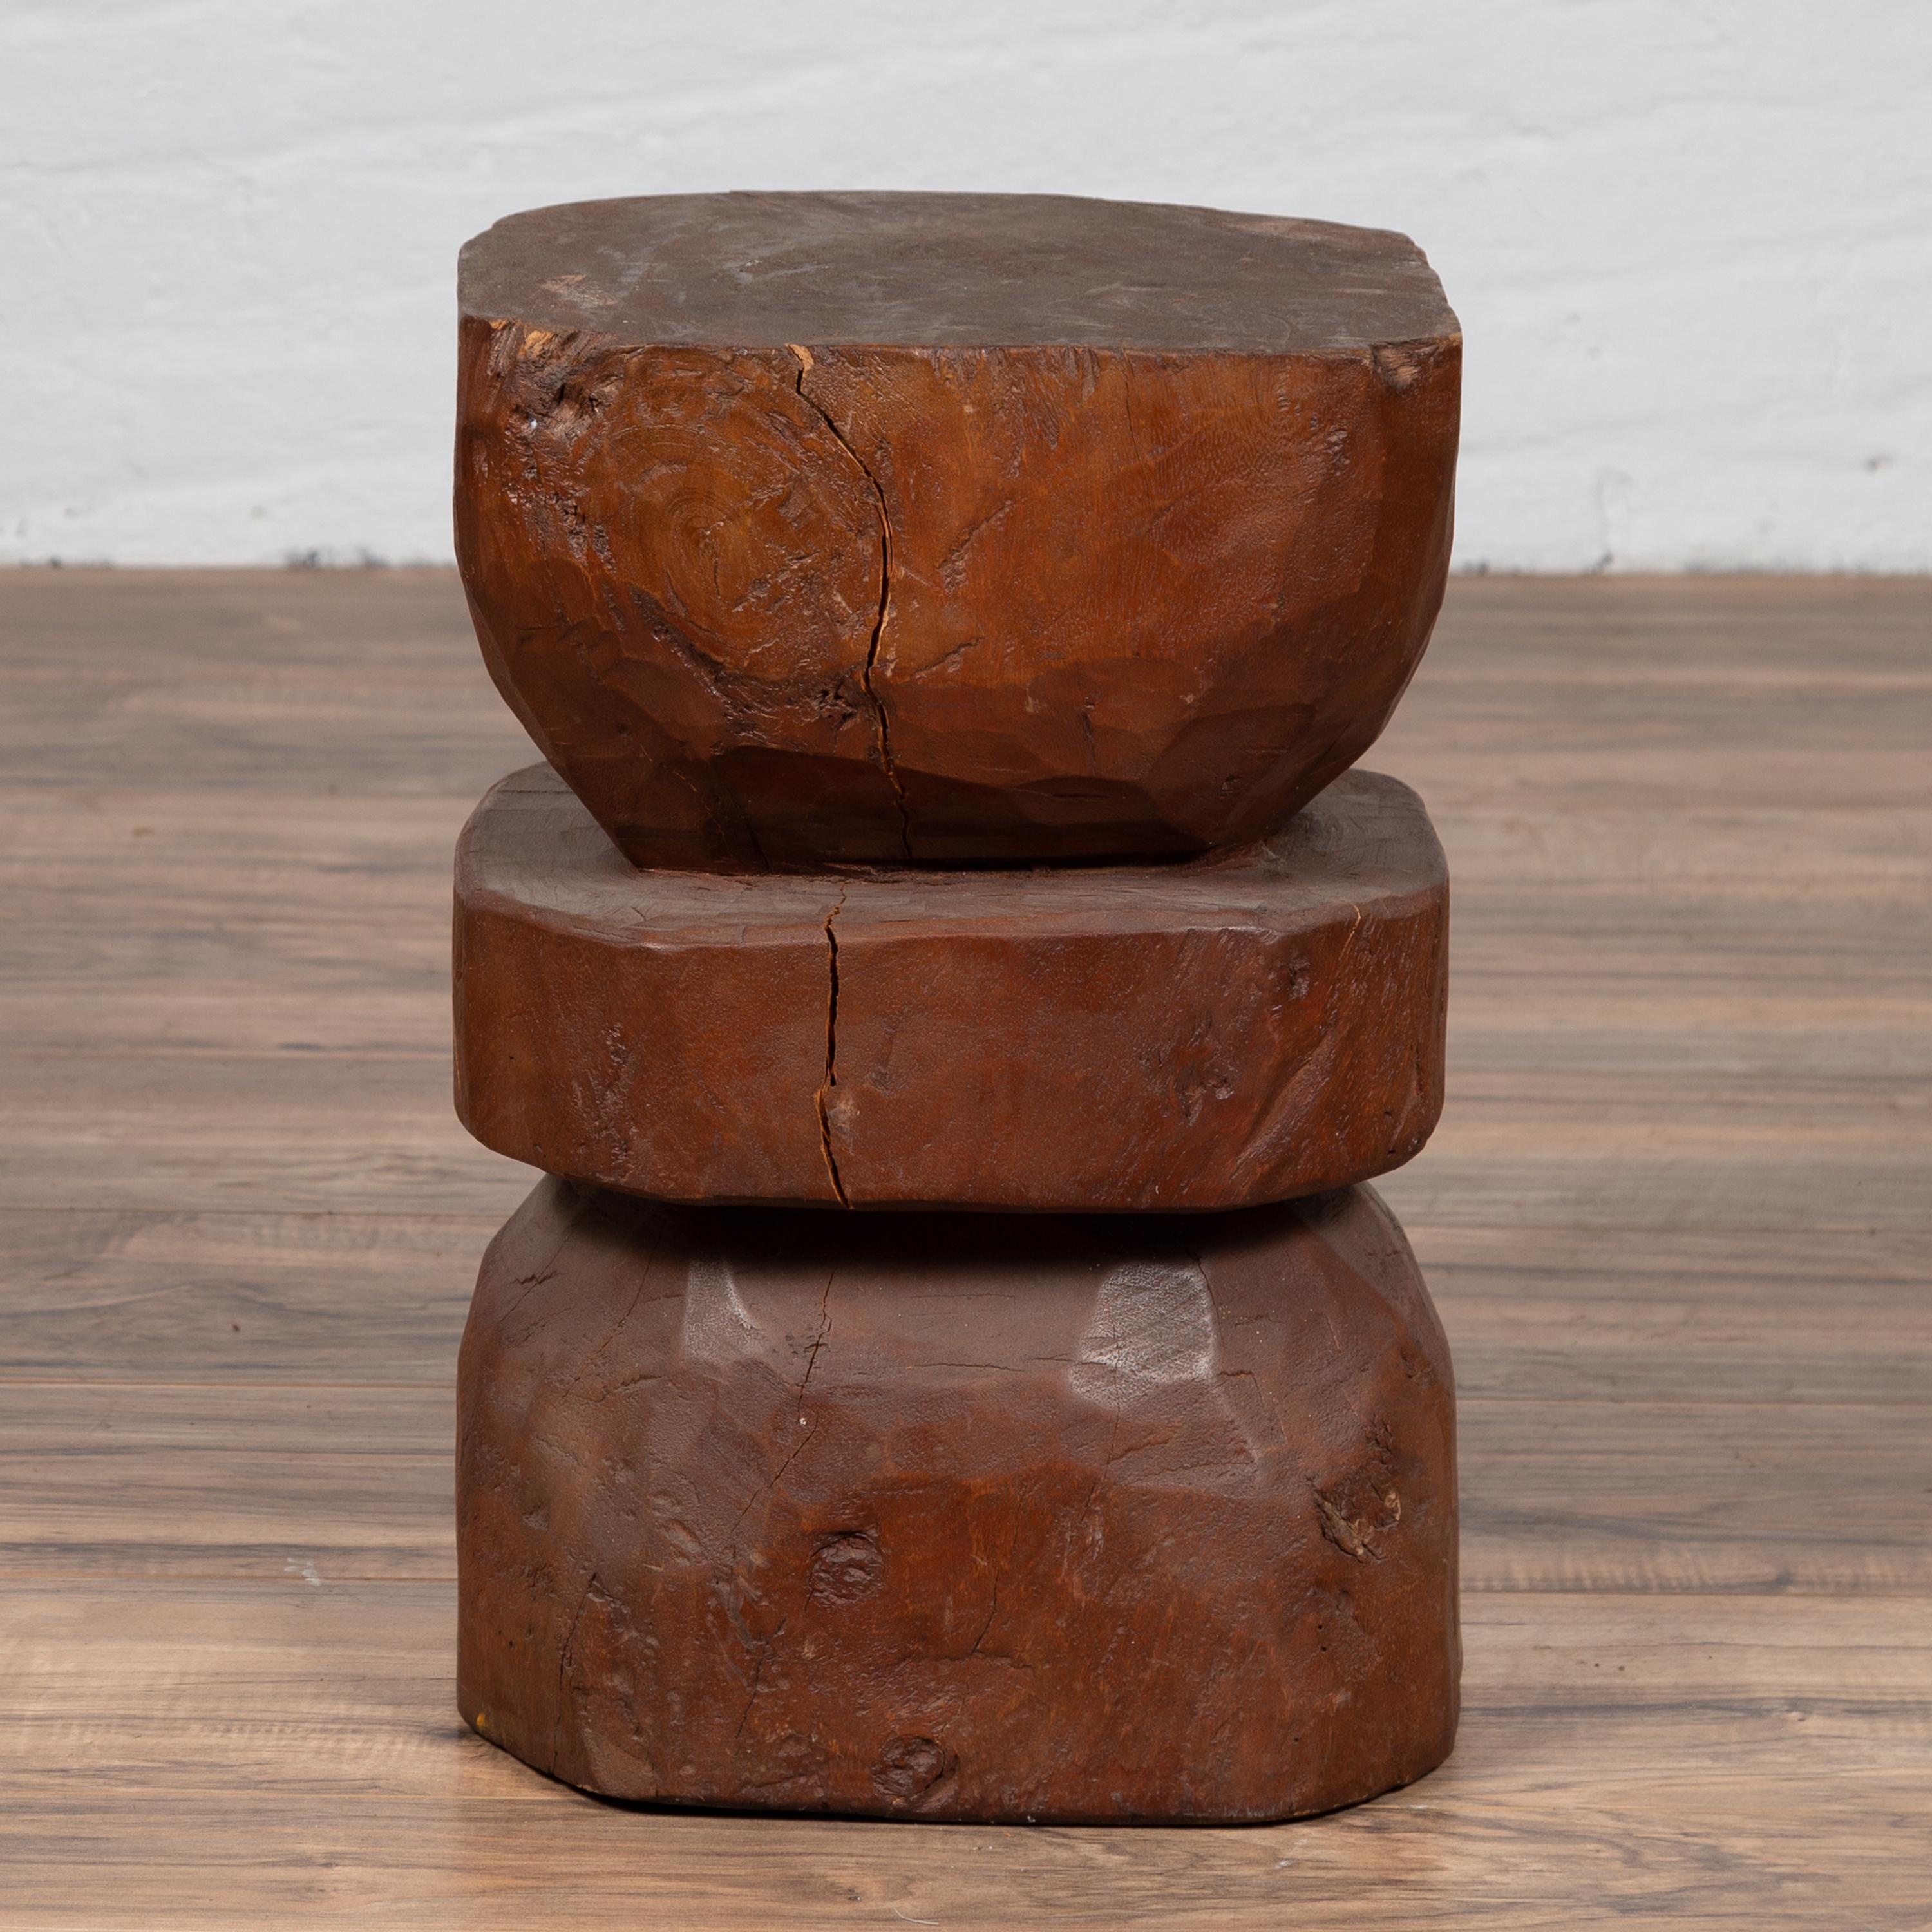 An antique Thai rustic tree stump pedestal from the early 20th century. Born in Thailand during the early years of the 20th century, this pedestal will charm you with its rustic appeal and interesting shape. Made of a tree stump roughly carved into